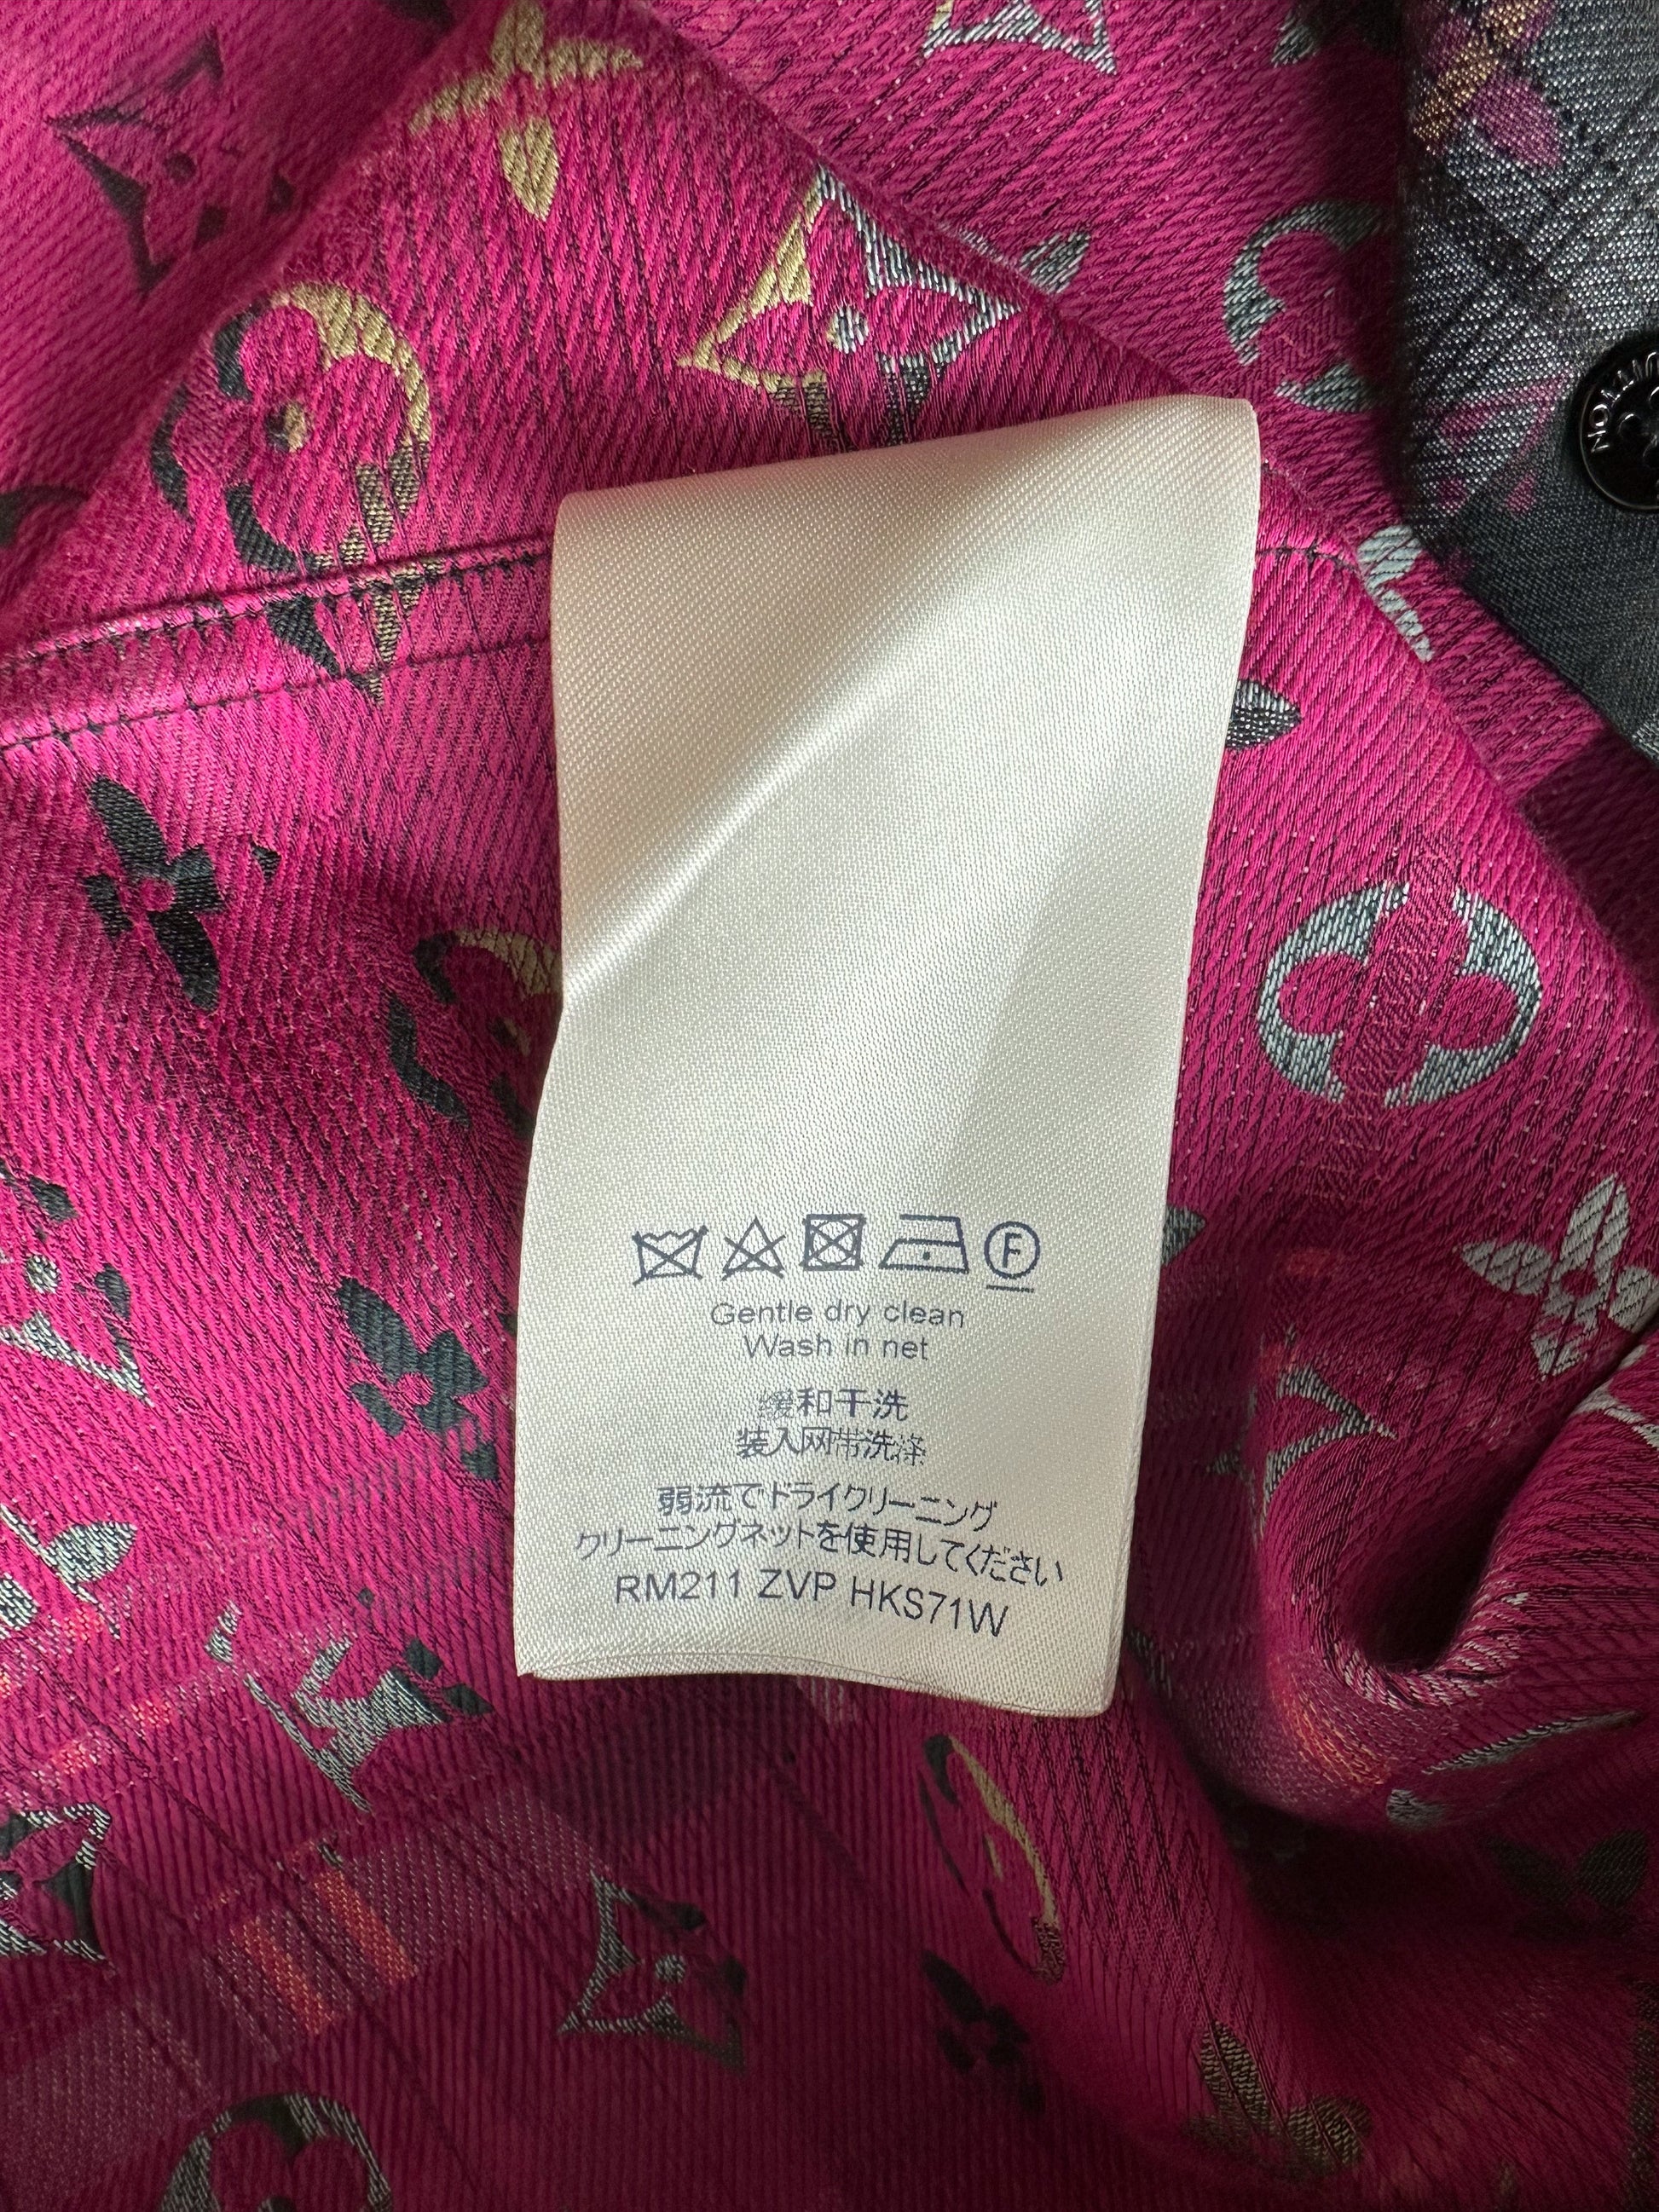 Pre-owned Louis Vuitton Shirt In Pink